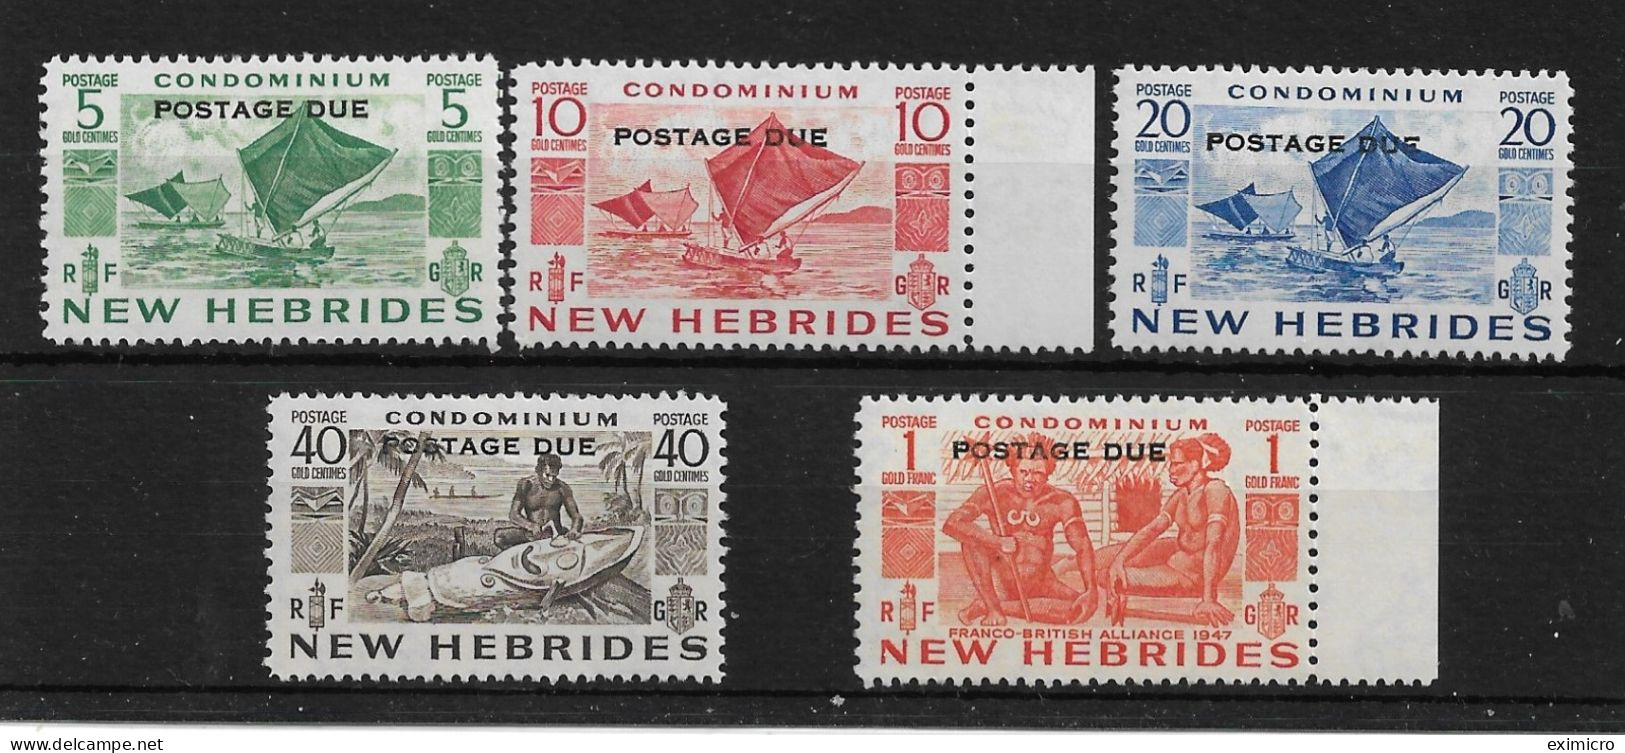 NEW HEBRIDES 1953 POSTAGE DUE SET SG D11/D15 UNMOUNTED MINT/VERY LIGHTLY MOUNTED MINT Cat £30 - Usati